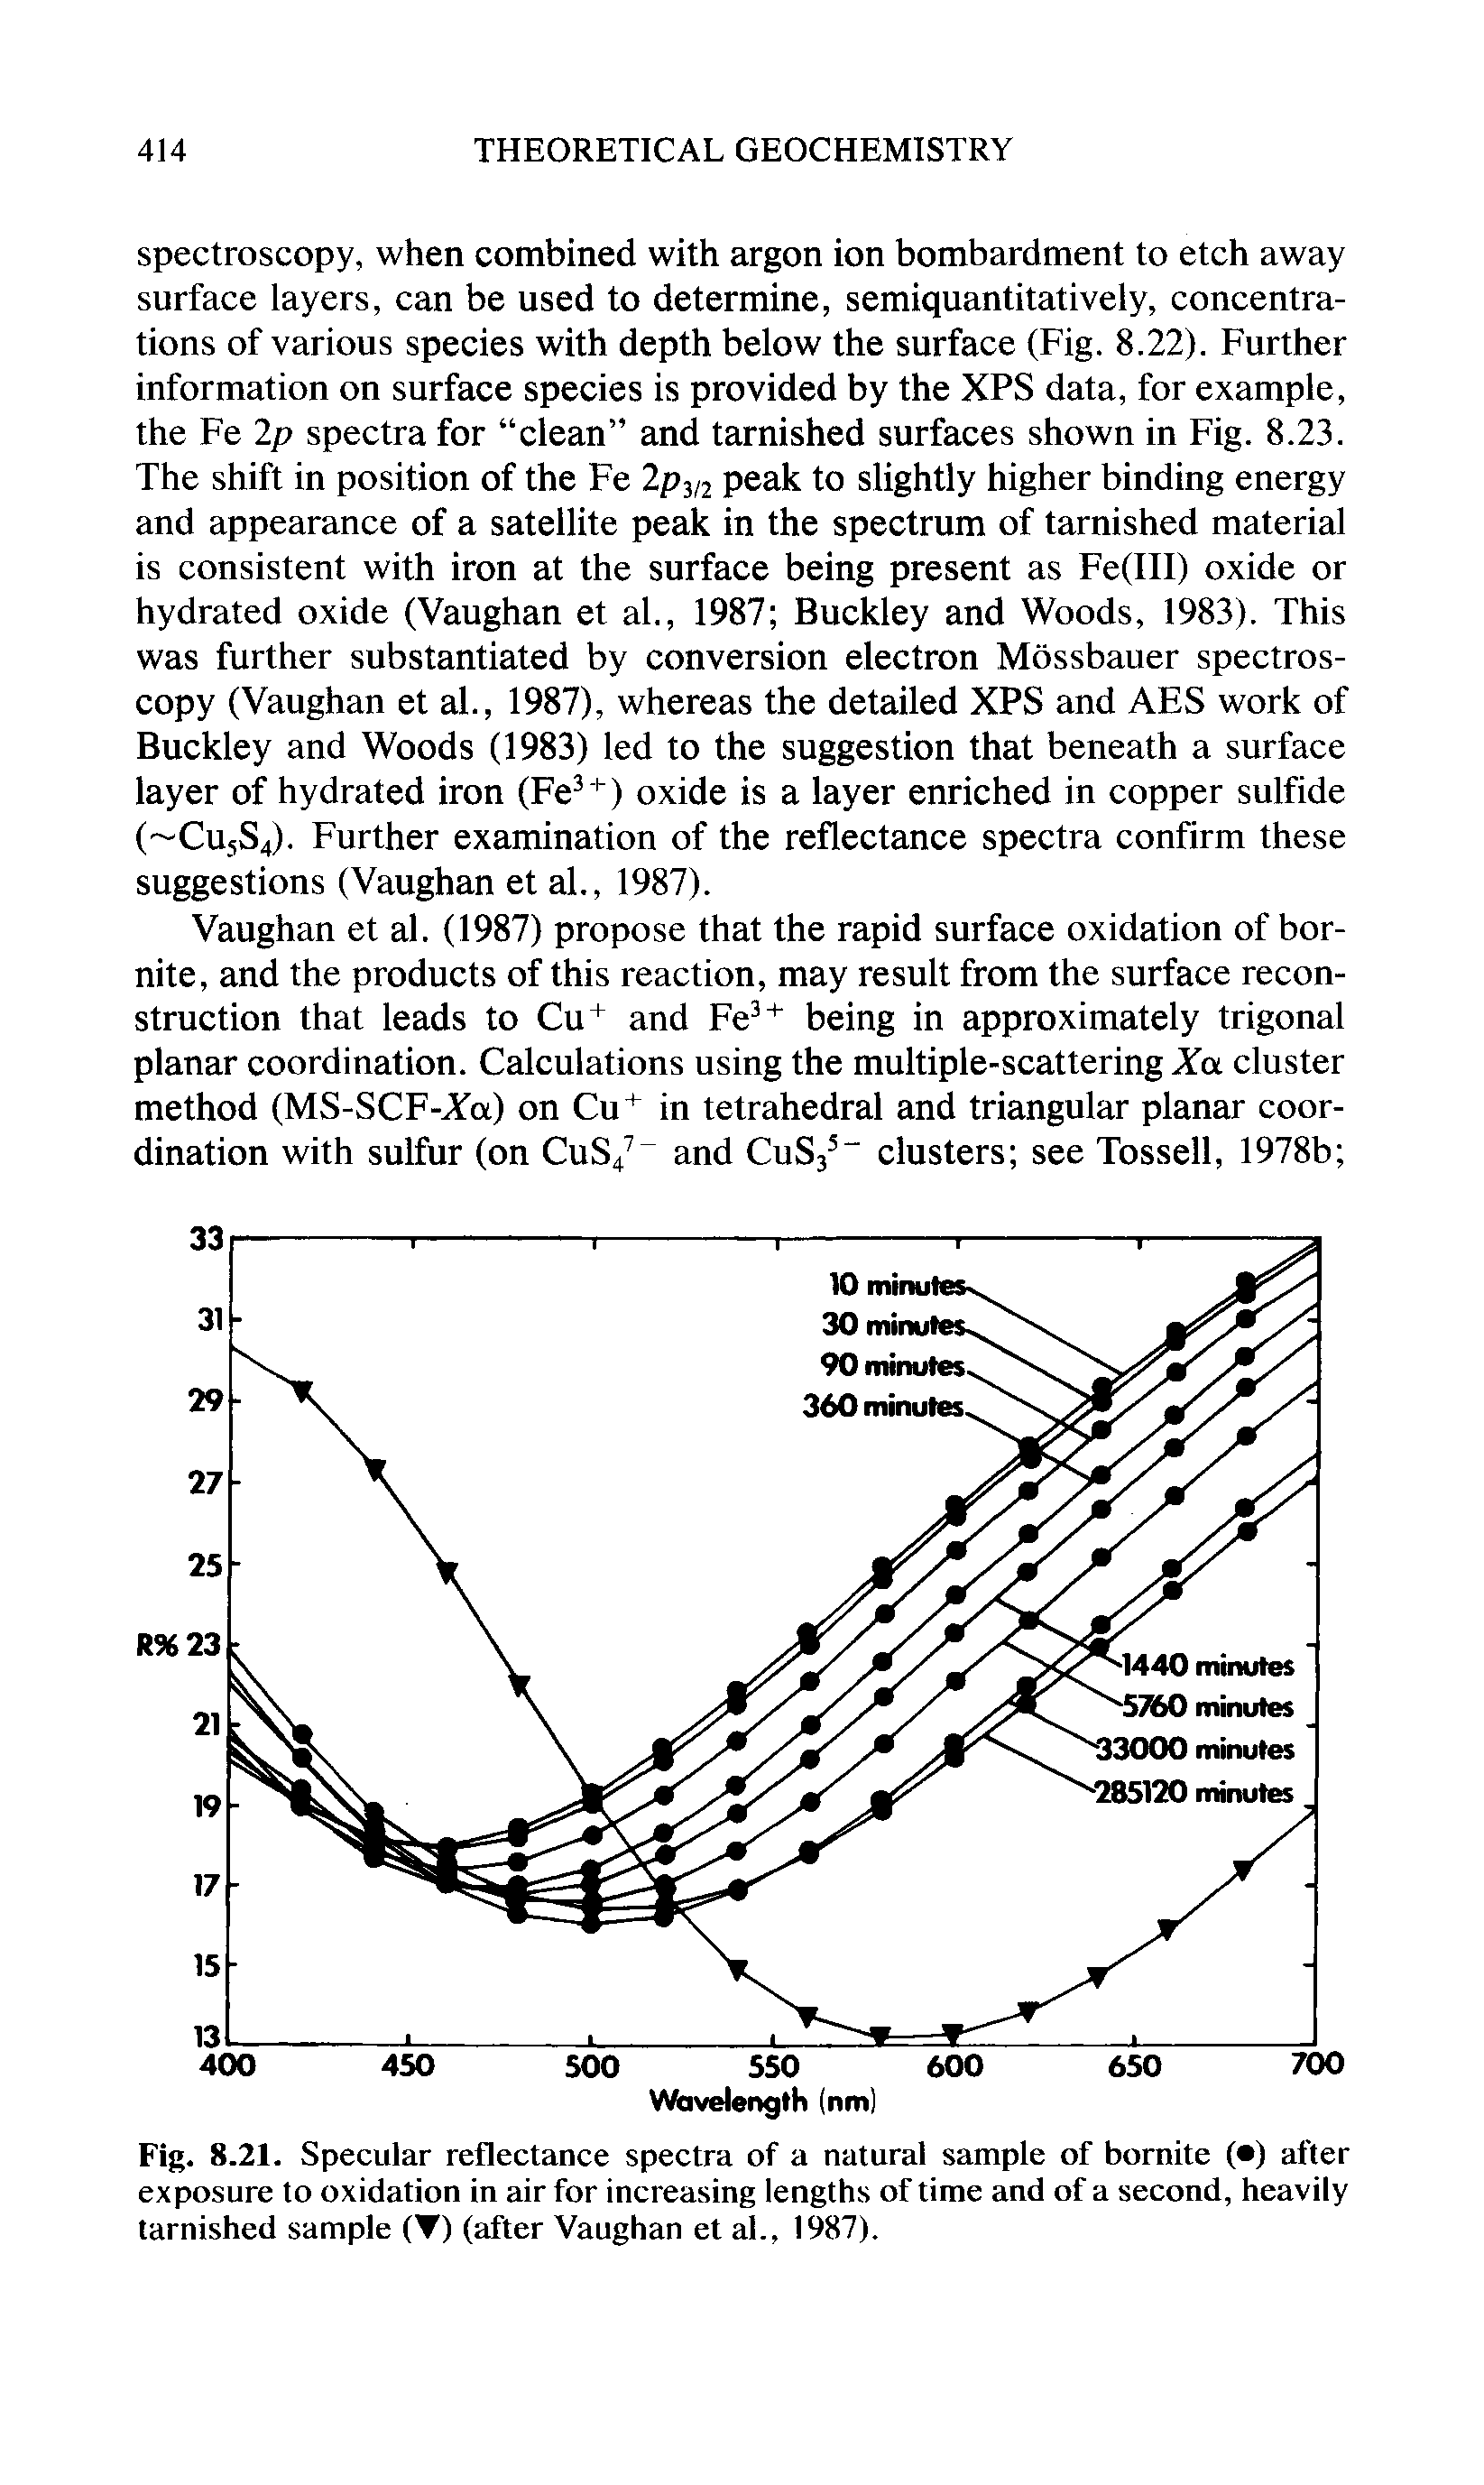 Fig. 8.21. Specular reflectance spectra of a natural sample of bornite ( ) after exposure to oxidation in air for increasing lengths of time and of a second, heavily tarnished sample (V) (after Vaughan et al., 1987).